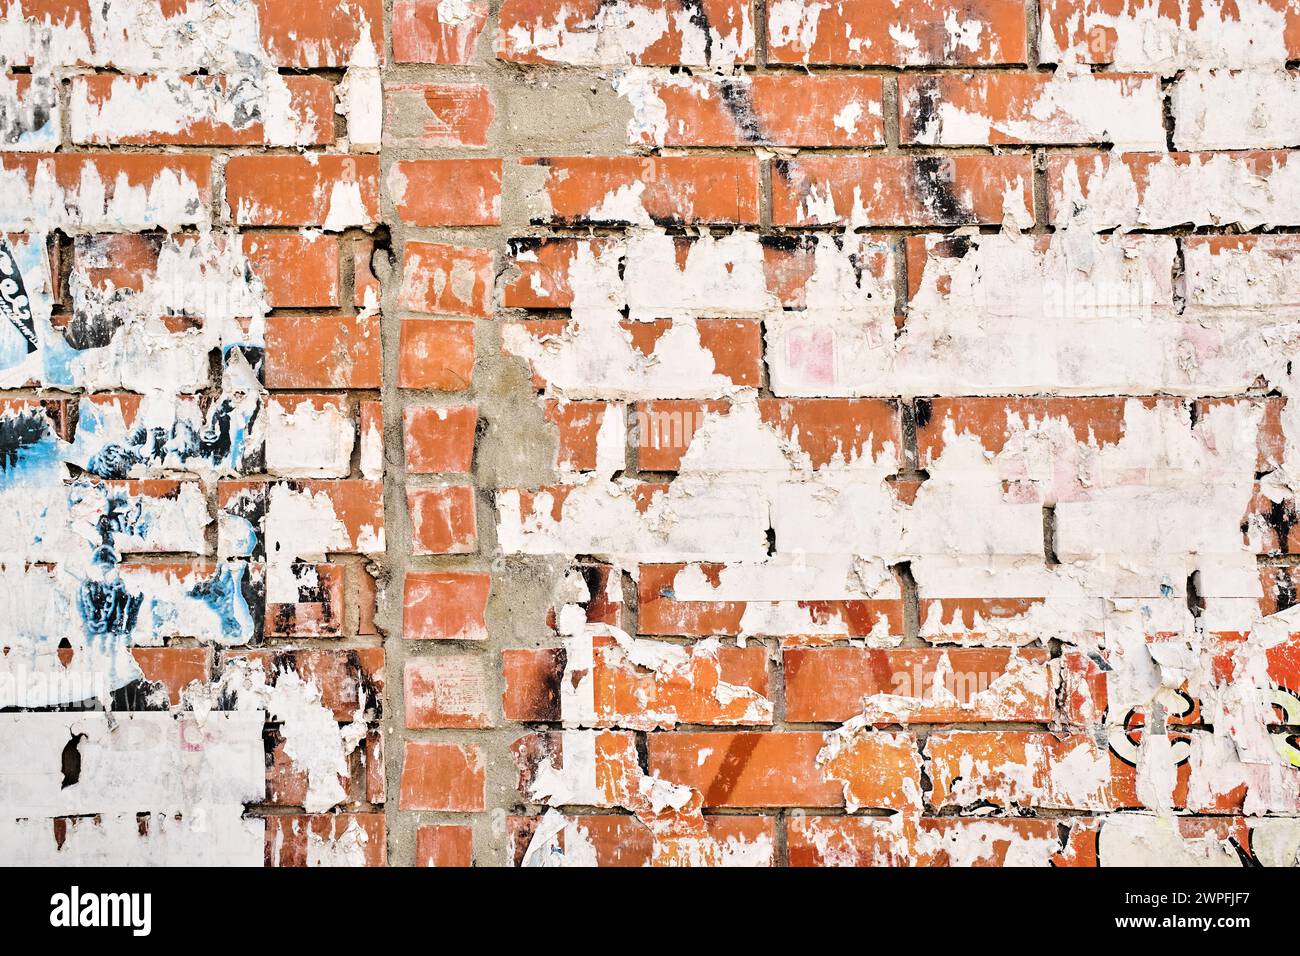 Textured torn poster paper against a rustic brick wall backdrop, urban grit and street pattern Stock Photo